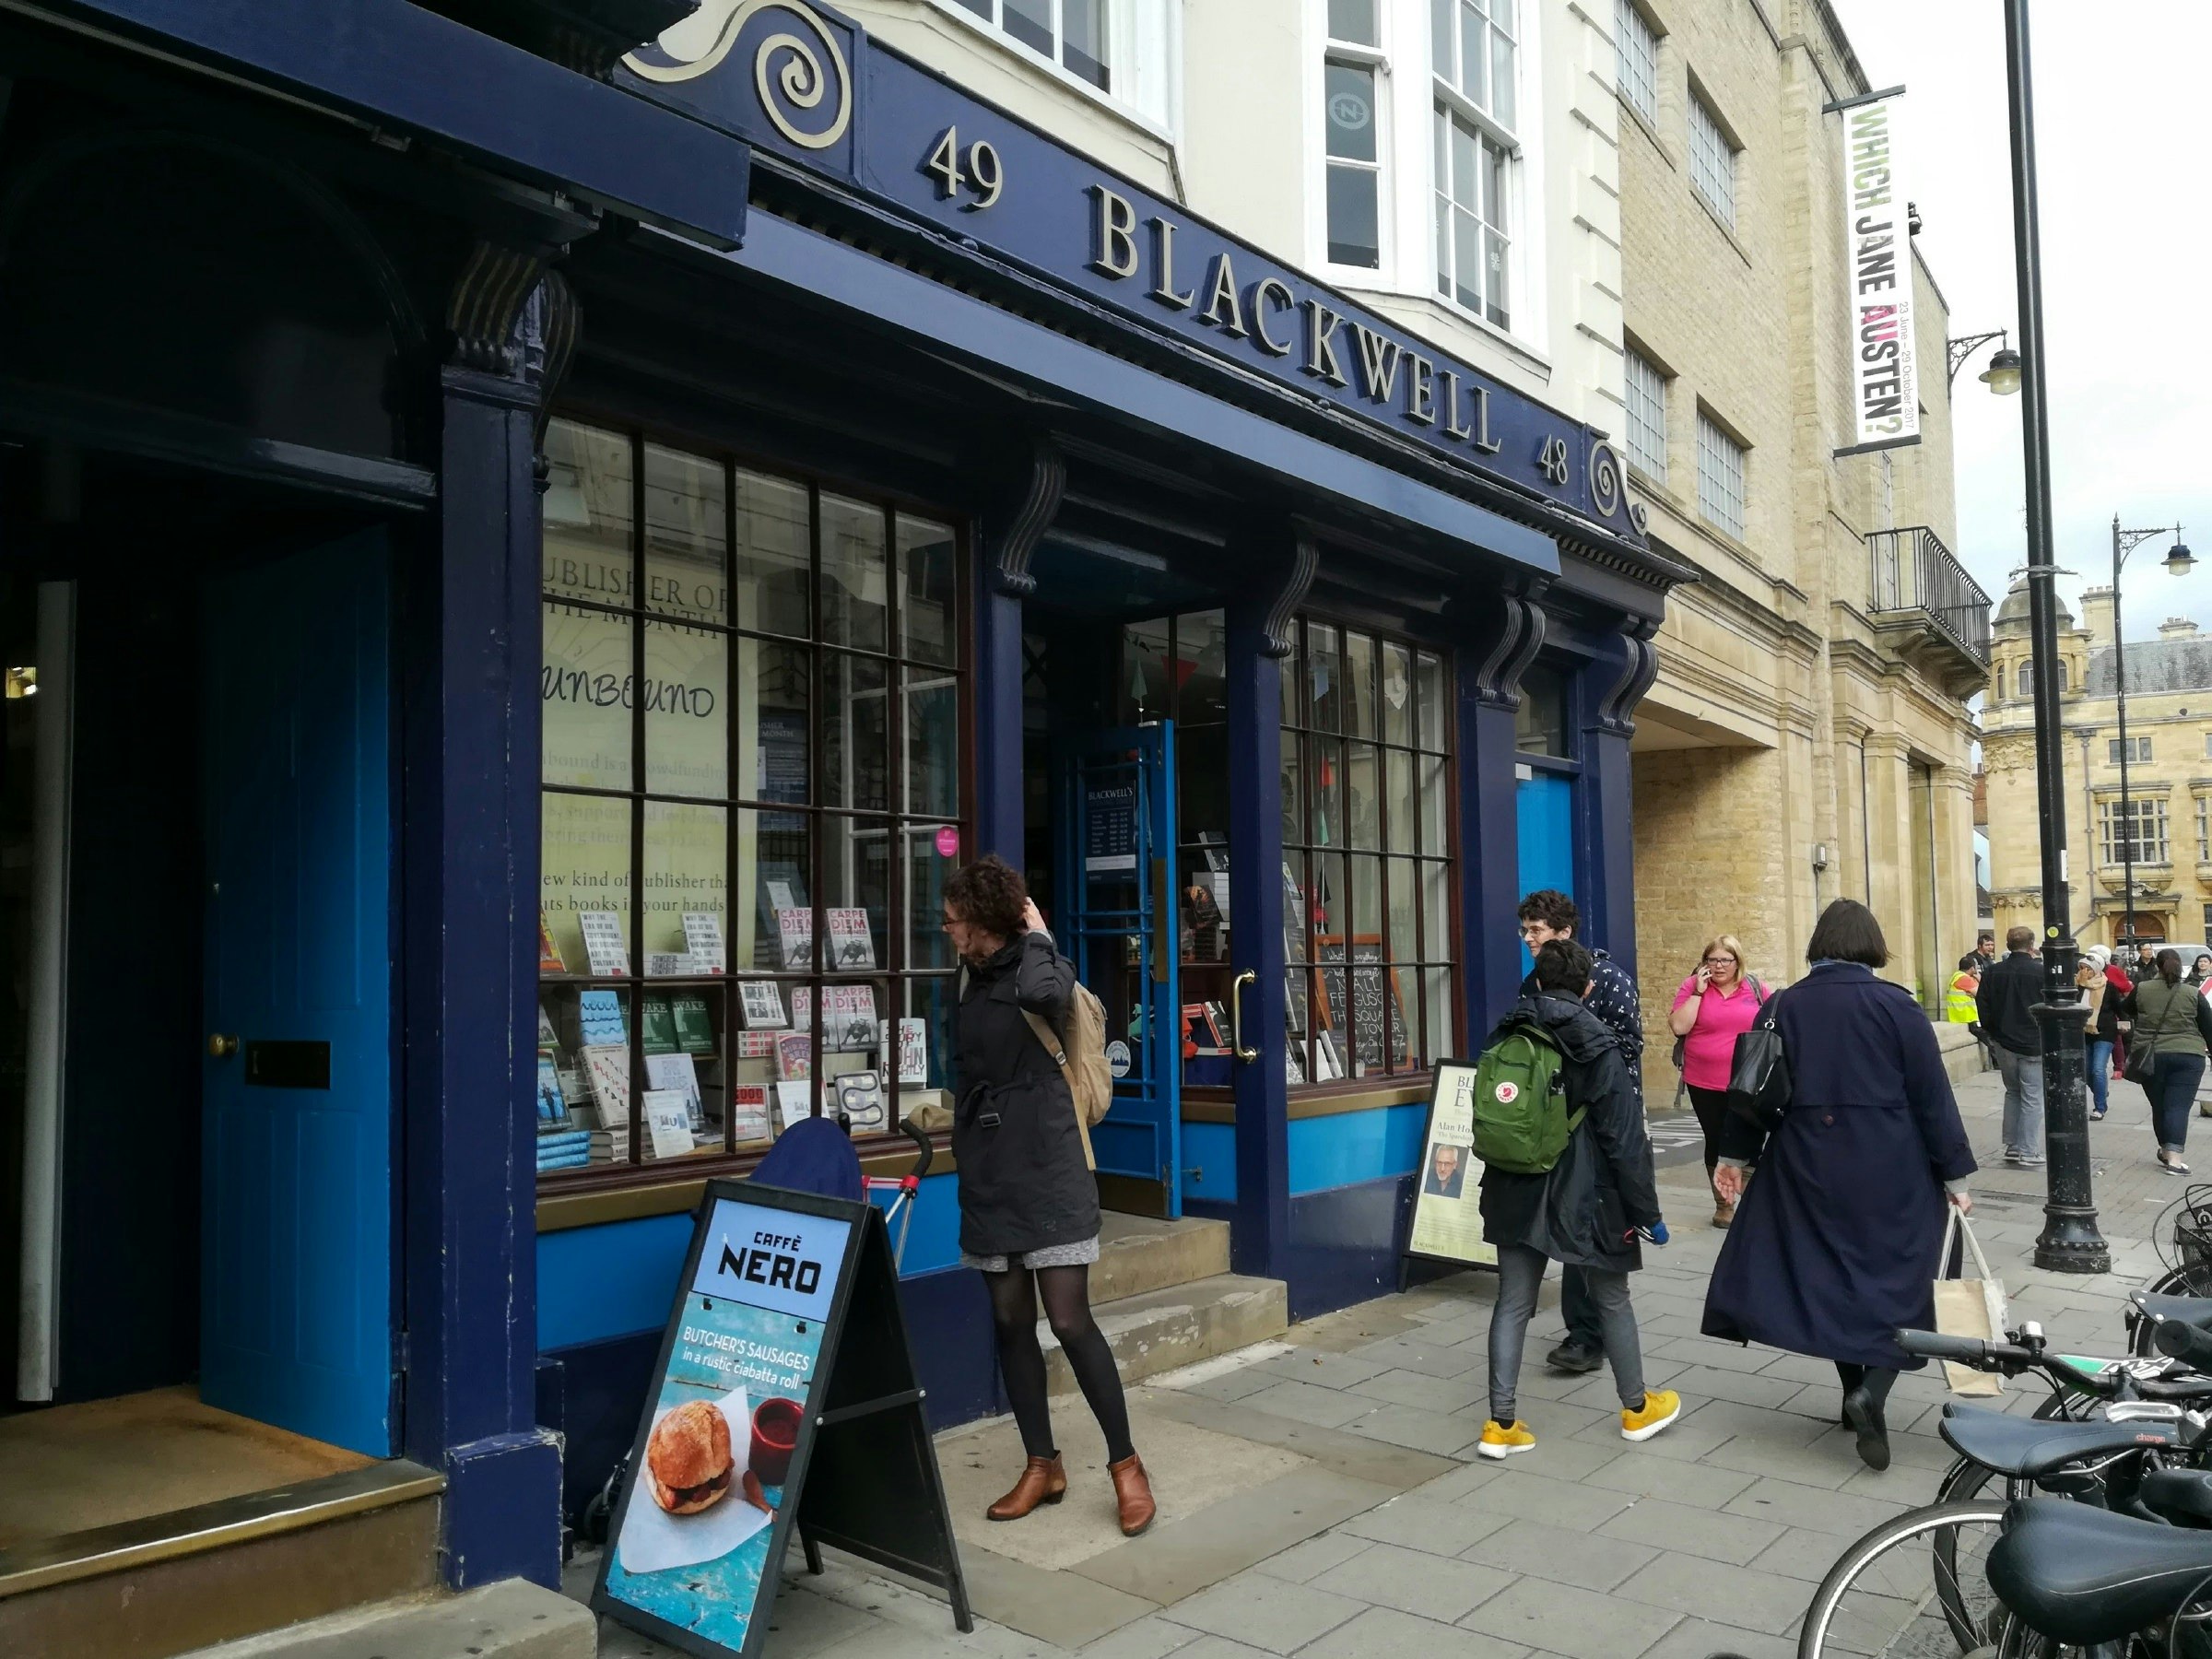 A close-up of Blackwell's entrance